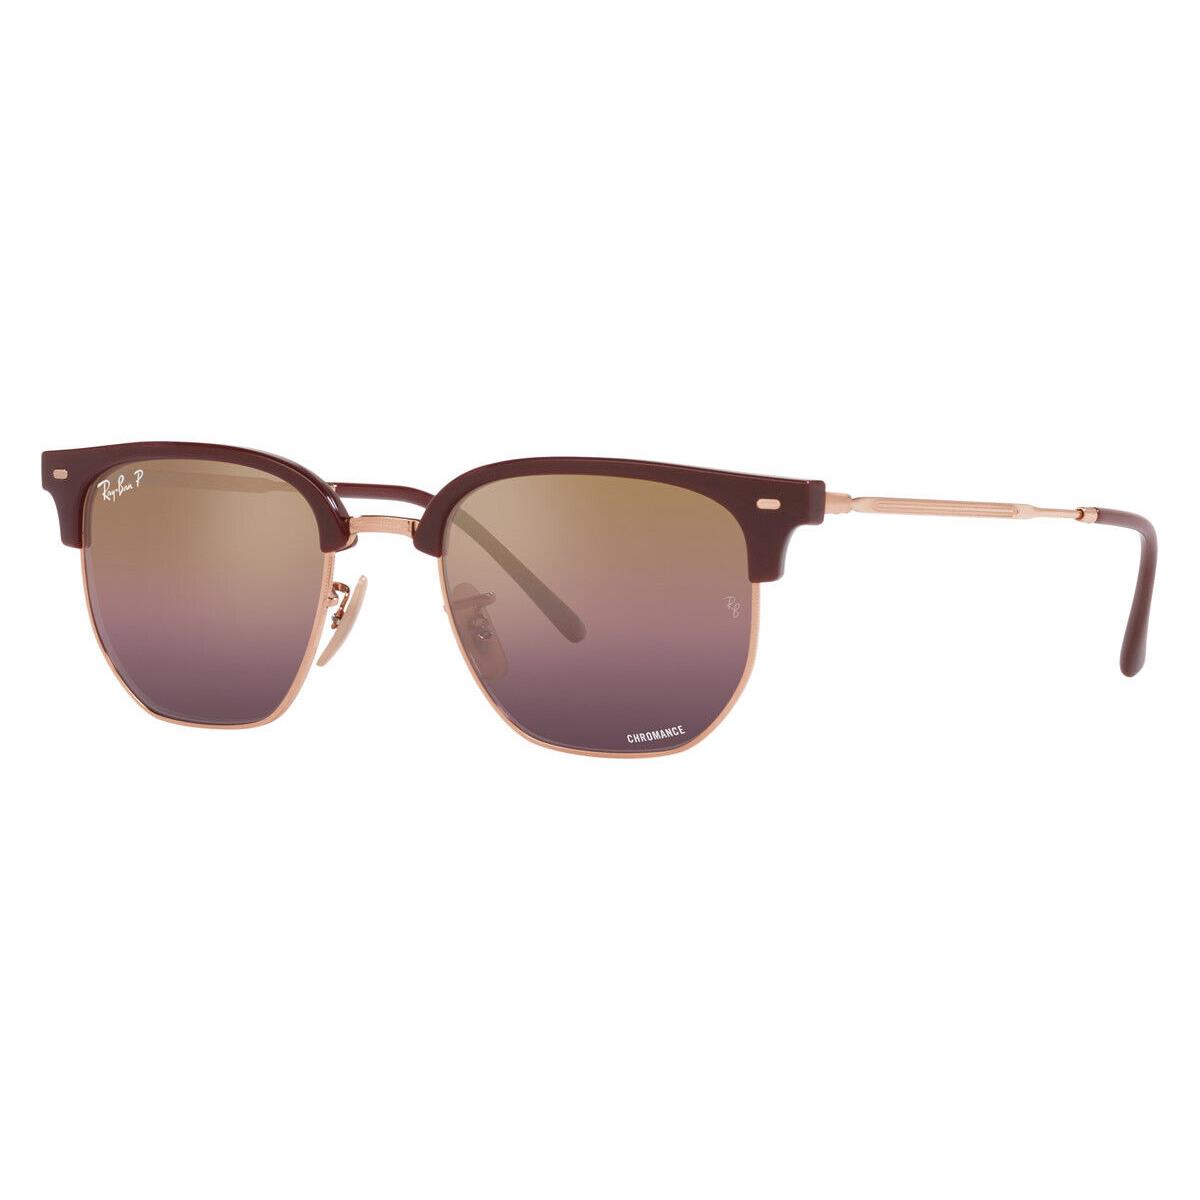 Ray-ban New Clubmaster RB4416 Clubmaster RB4416 Sunglasses Irregular 53mm - Frame: Bordeaux on Rose Gold / Polarized Wine, Lens: Polarized Wine